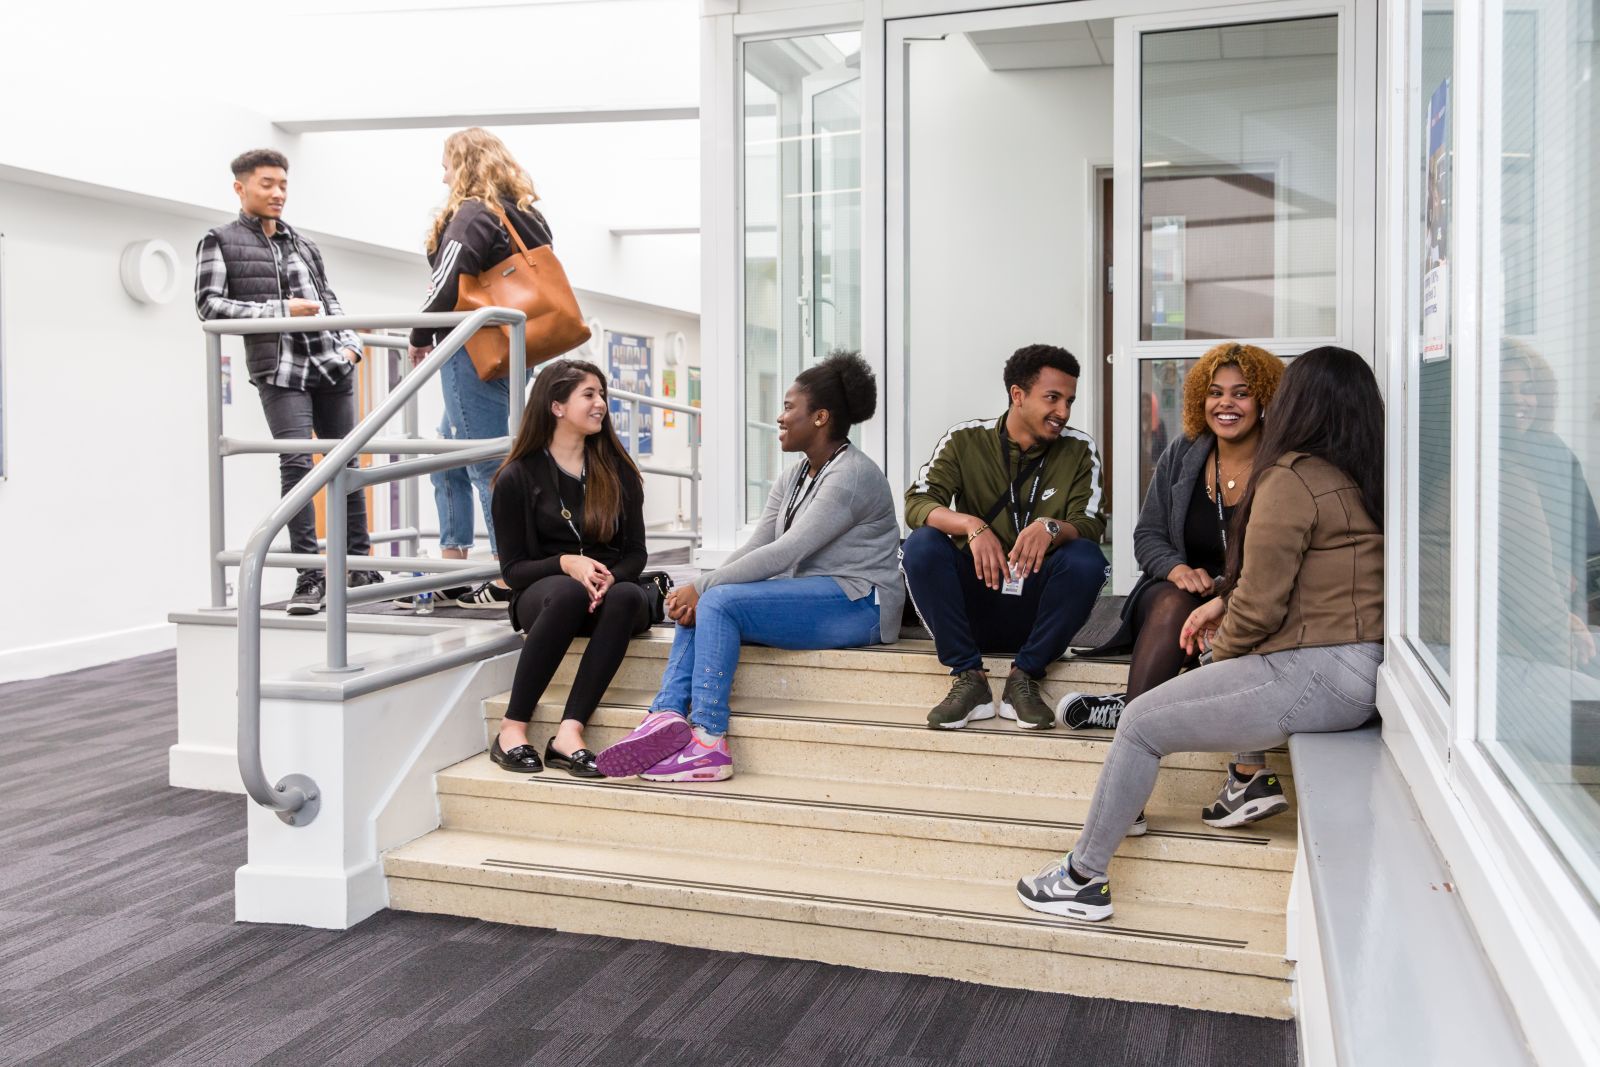 A group of student on some steps indoors, talking